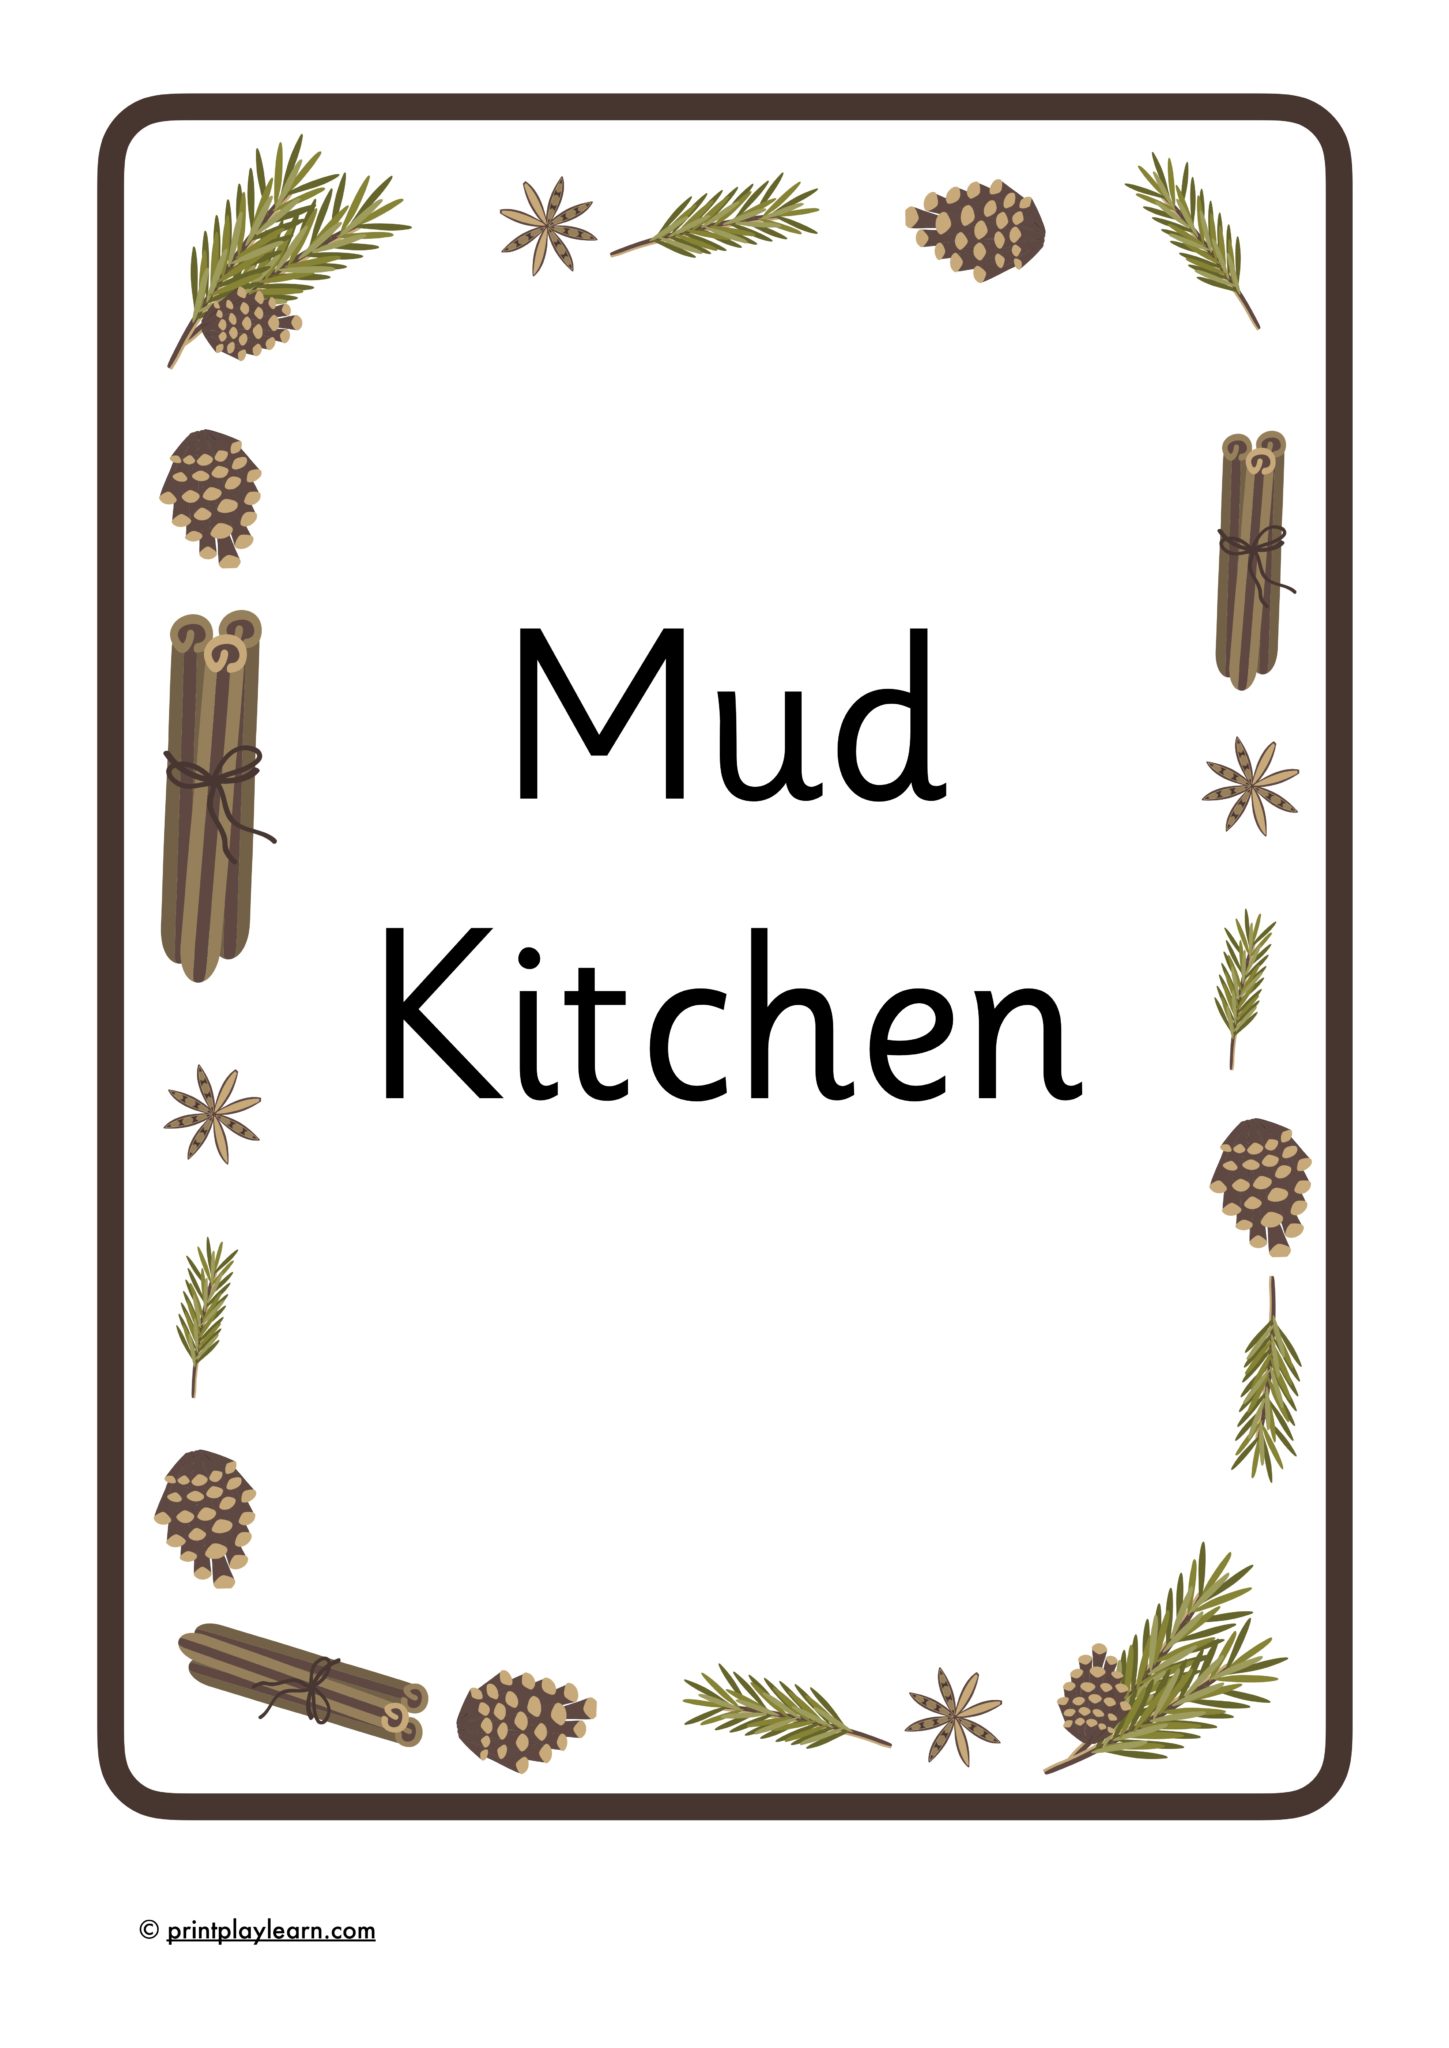 mud-kitchen-recipe-paper-printable-teaching-resources-print-play-learn